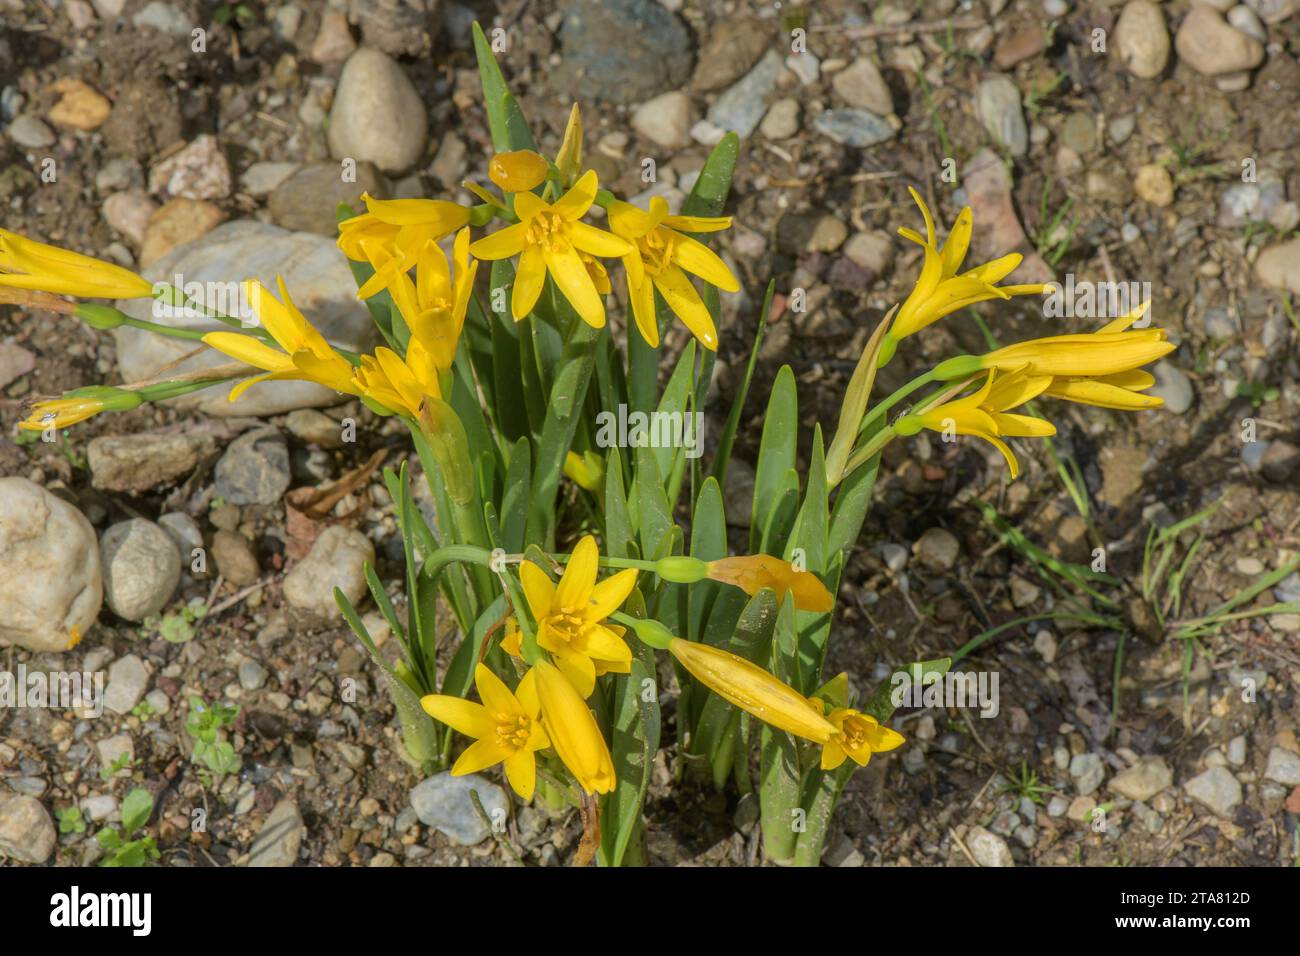 Yellow fire lily, Cyrtanthus breviflorus in flower; damp grassland, South Africa. Stock Photo